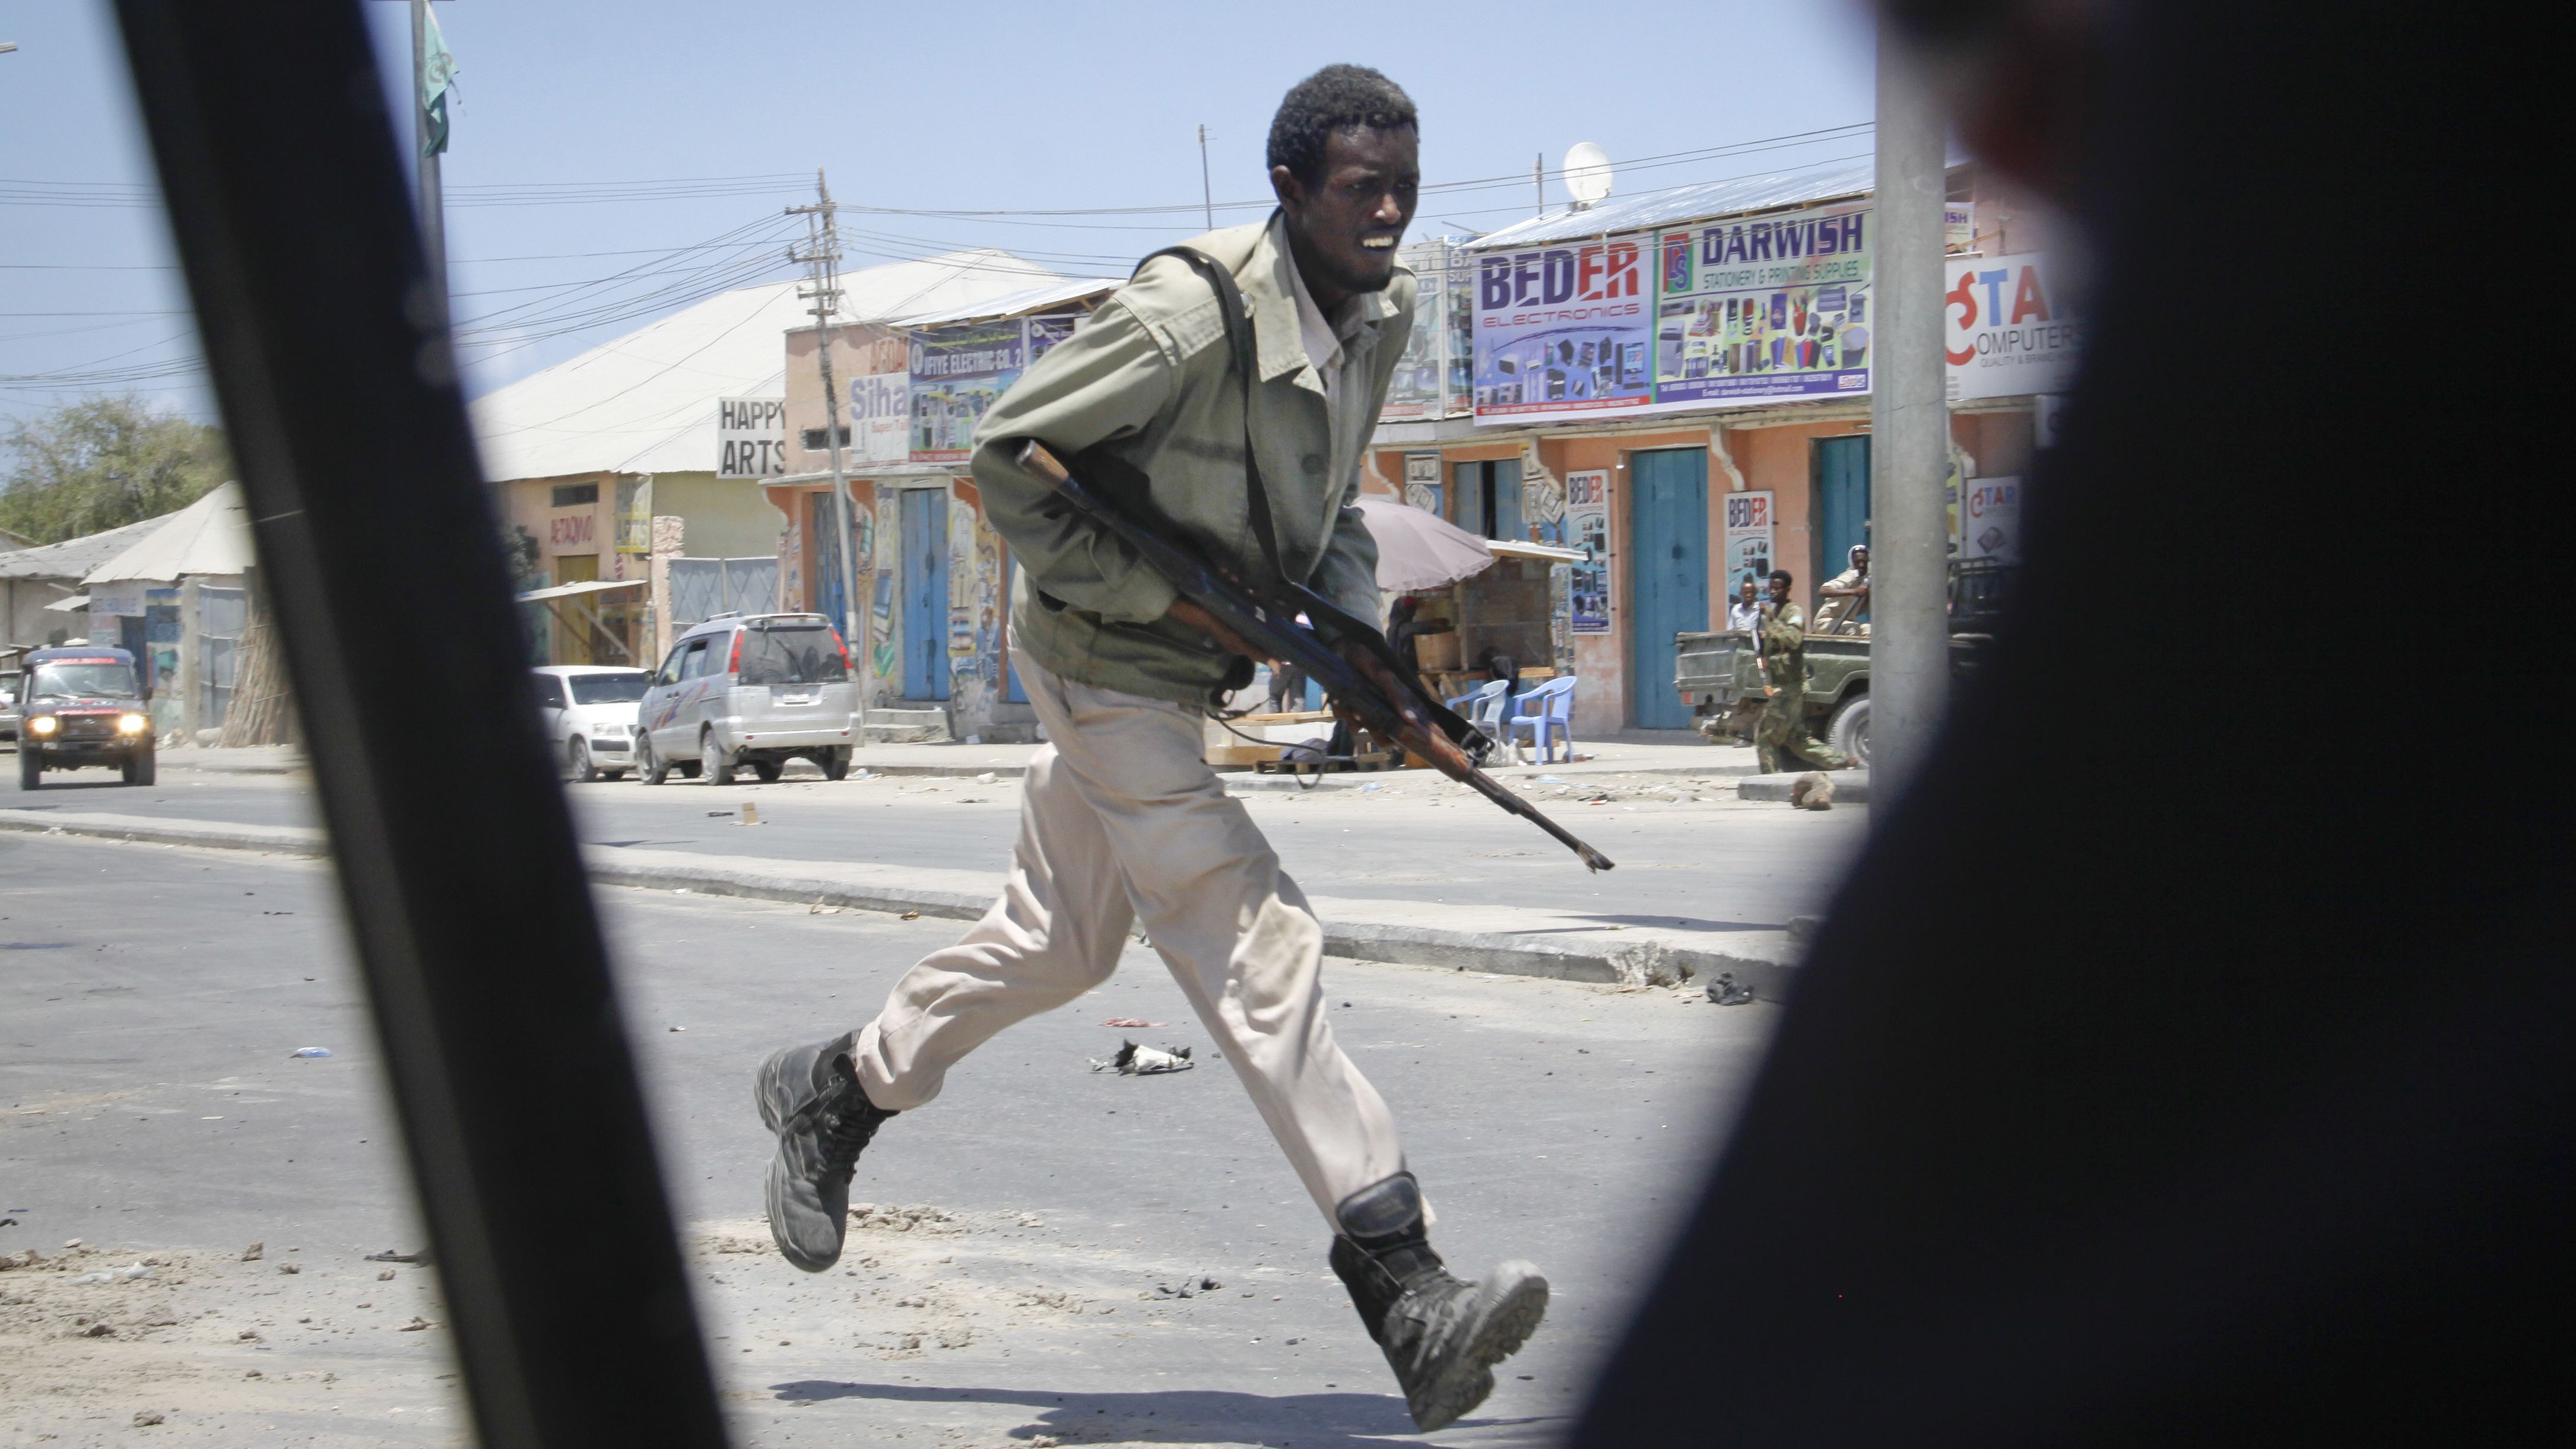 A Somali soldier runs during fighting following a car bomb explosion Tuesday.